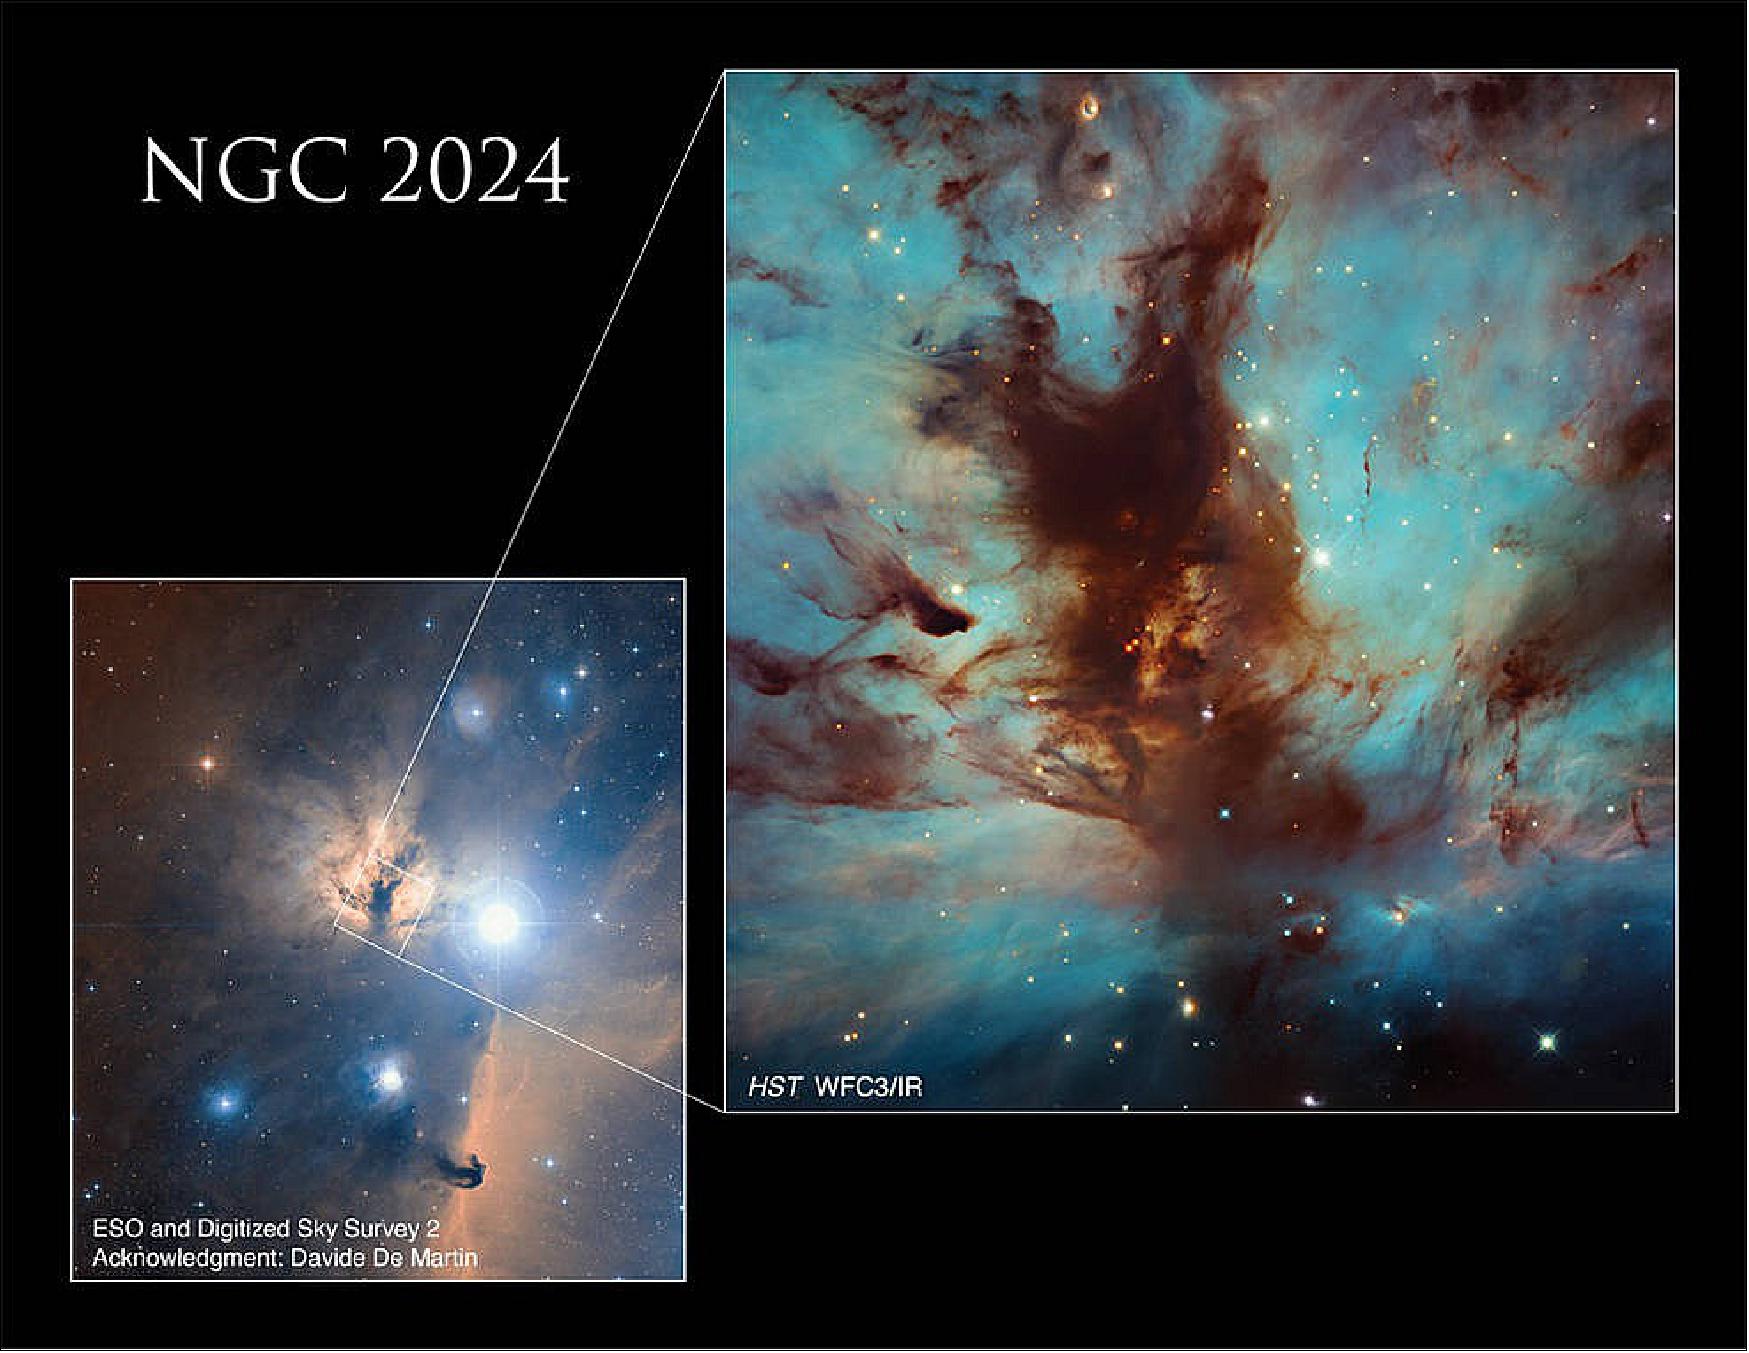 Figure 12: The Flame Nebula, also called NGC 2024, is part of the Orion Molecular Cloud Complex and is found near the Horsehead Nebula [image credits: NASA, ESA, and N. Da Rio (University of Virginia), ESO, DSS2, and D. De Martin; Processing: Gladys Kober (NASA/Catholic University of America)]